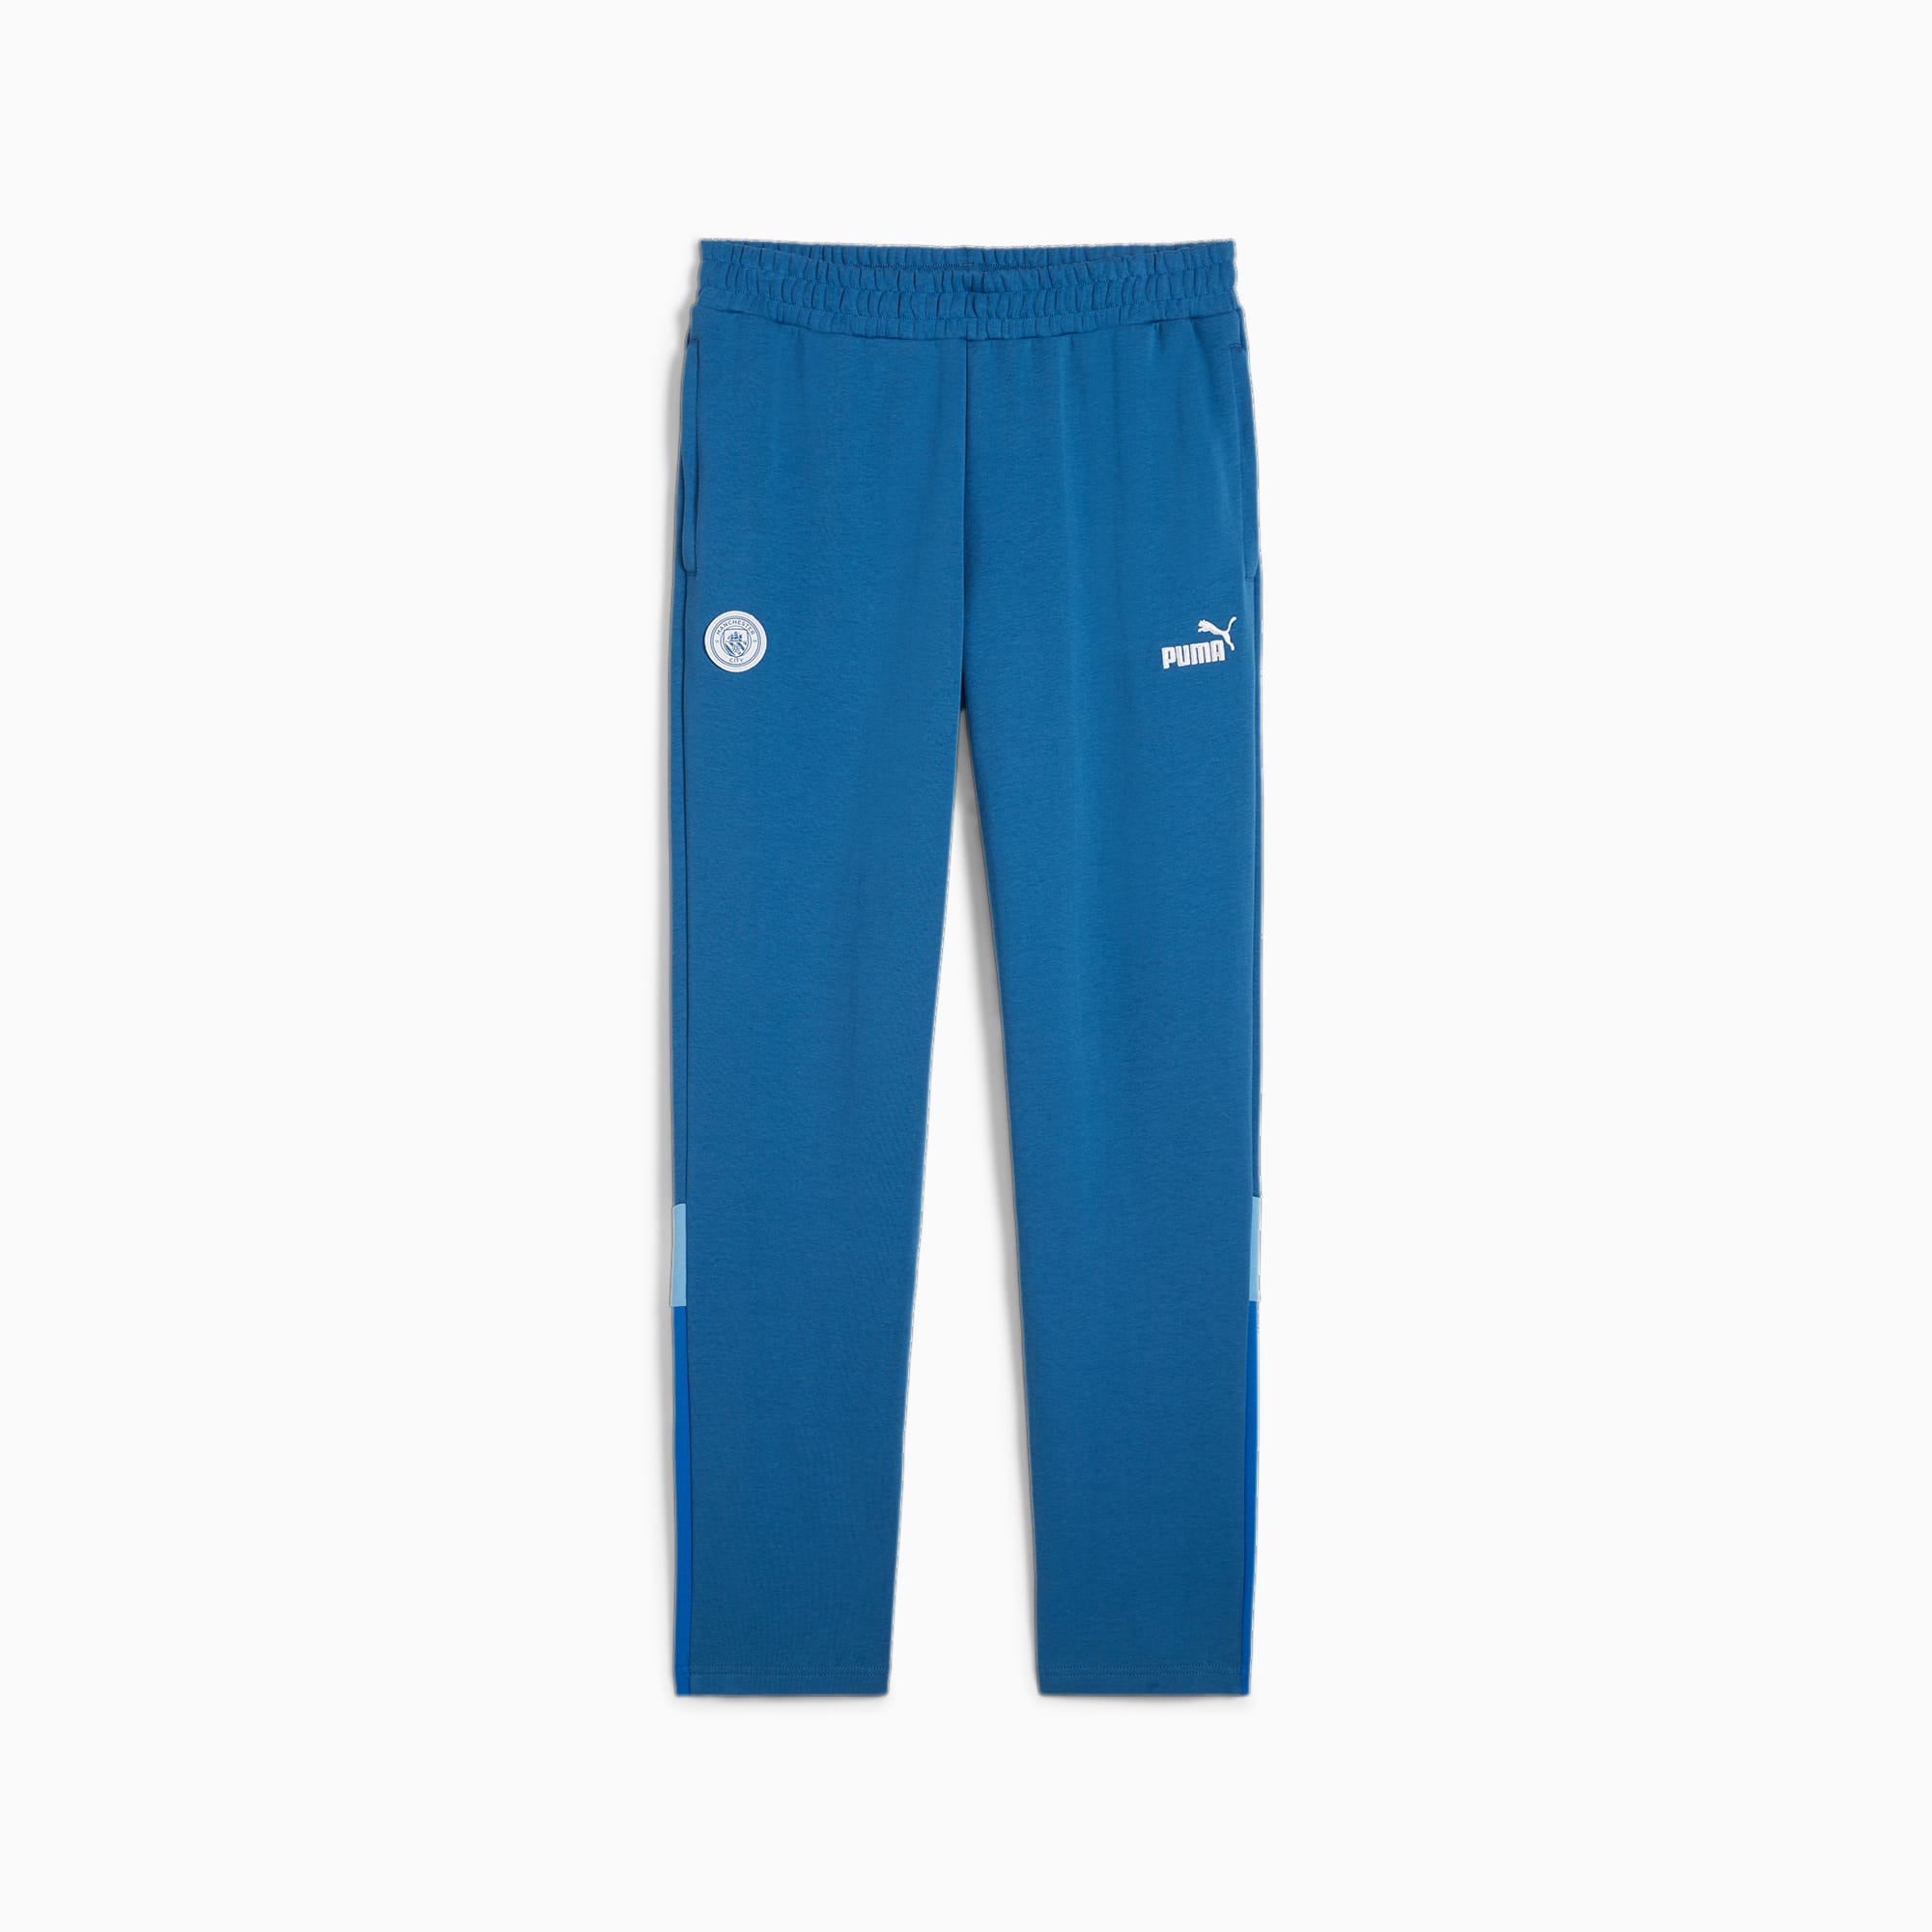 Manchester City FtblArchive Track Pants